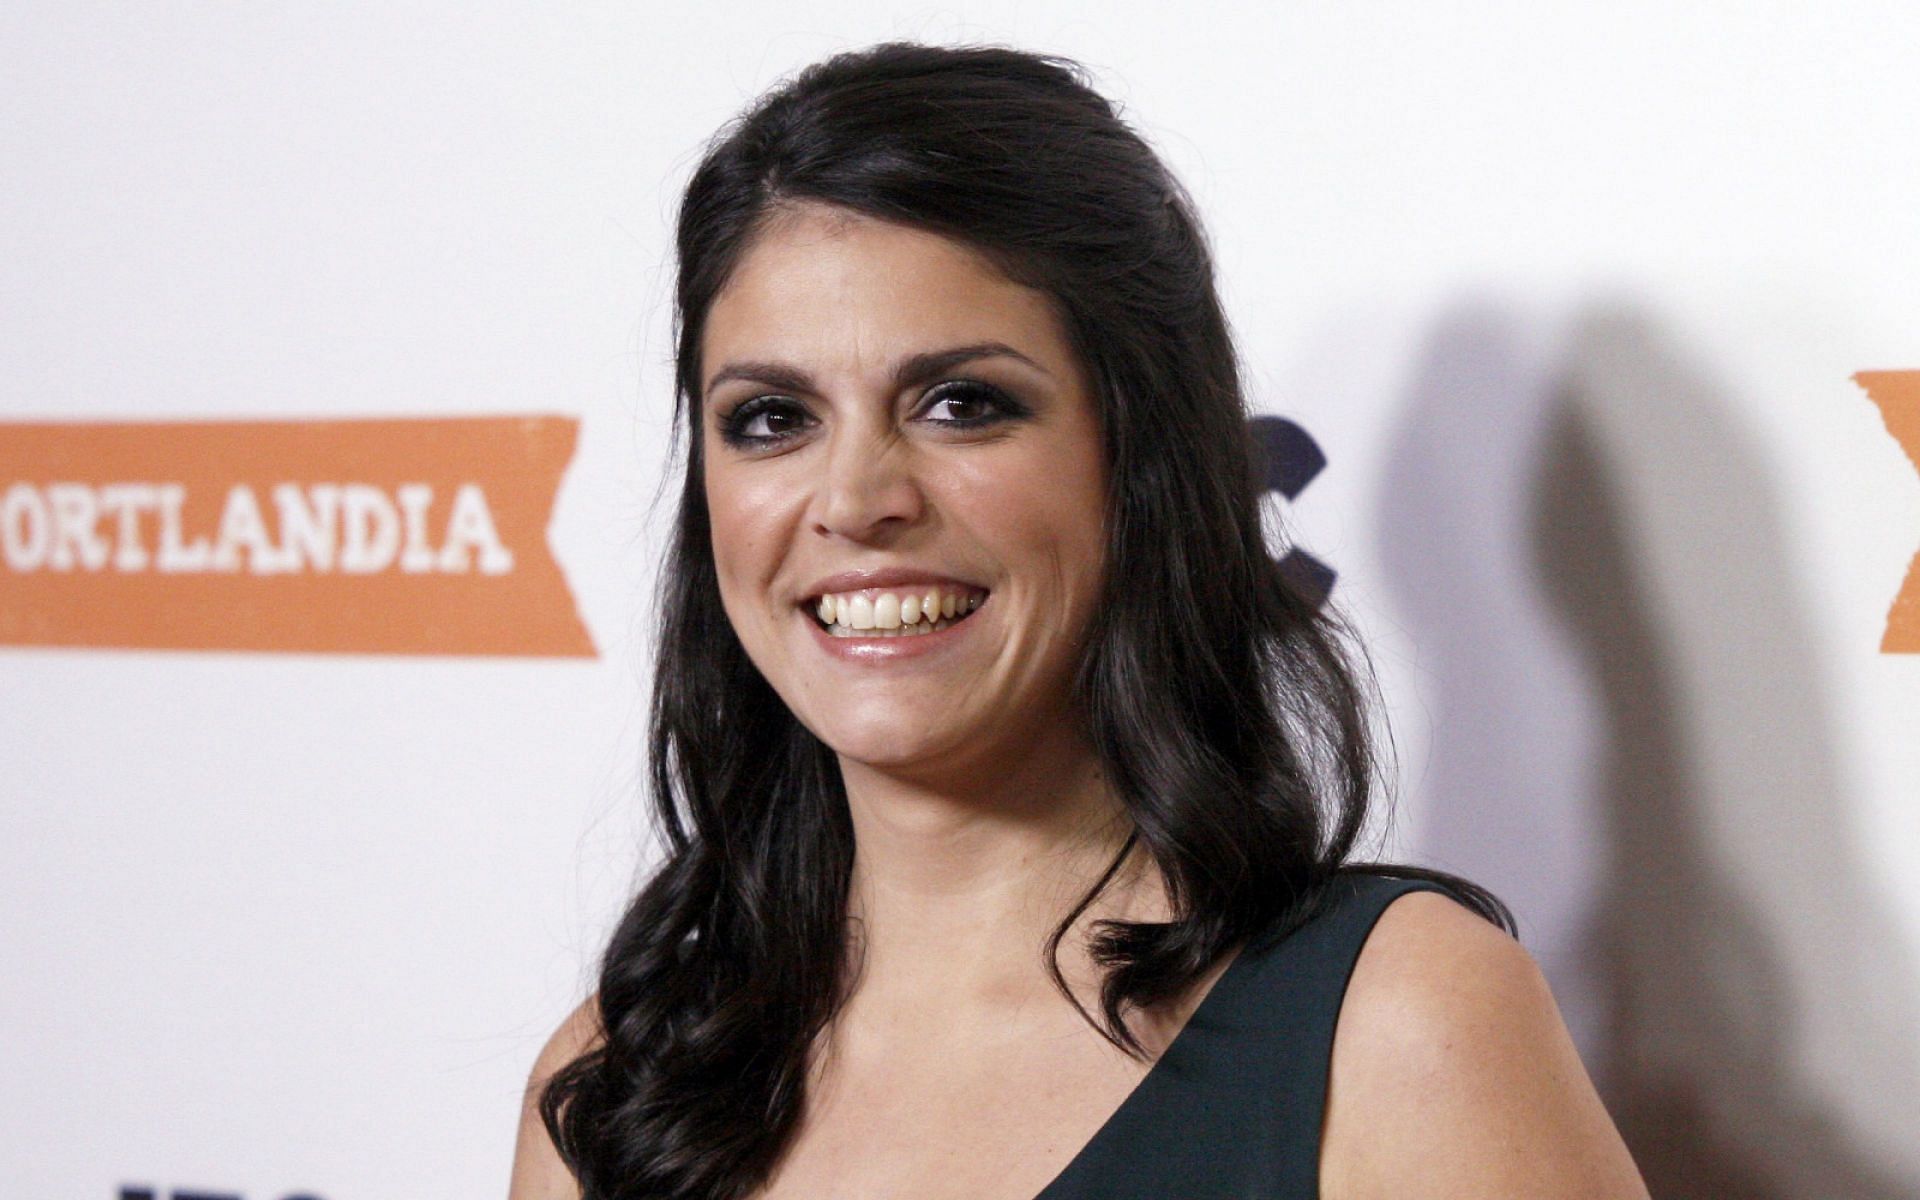 Cecily Strong won hearts with her act on Saturday Night Live this week (Image via Getty Images)